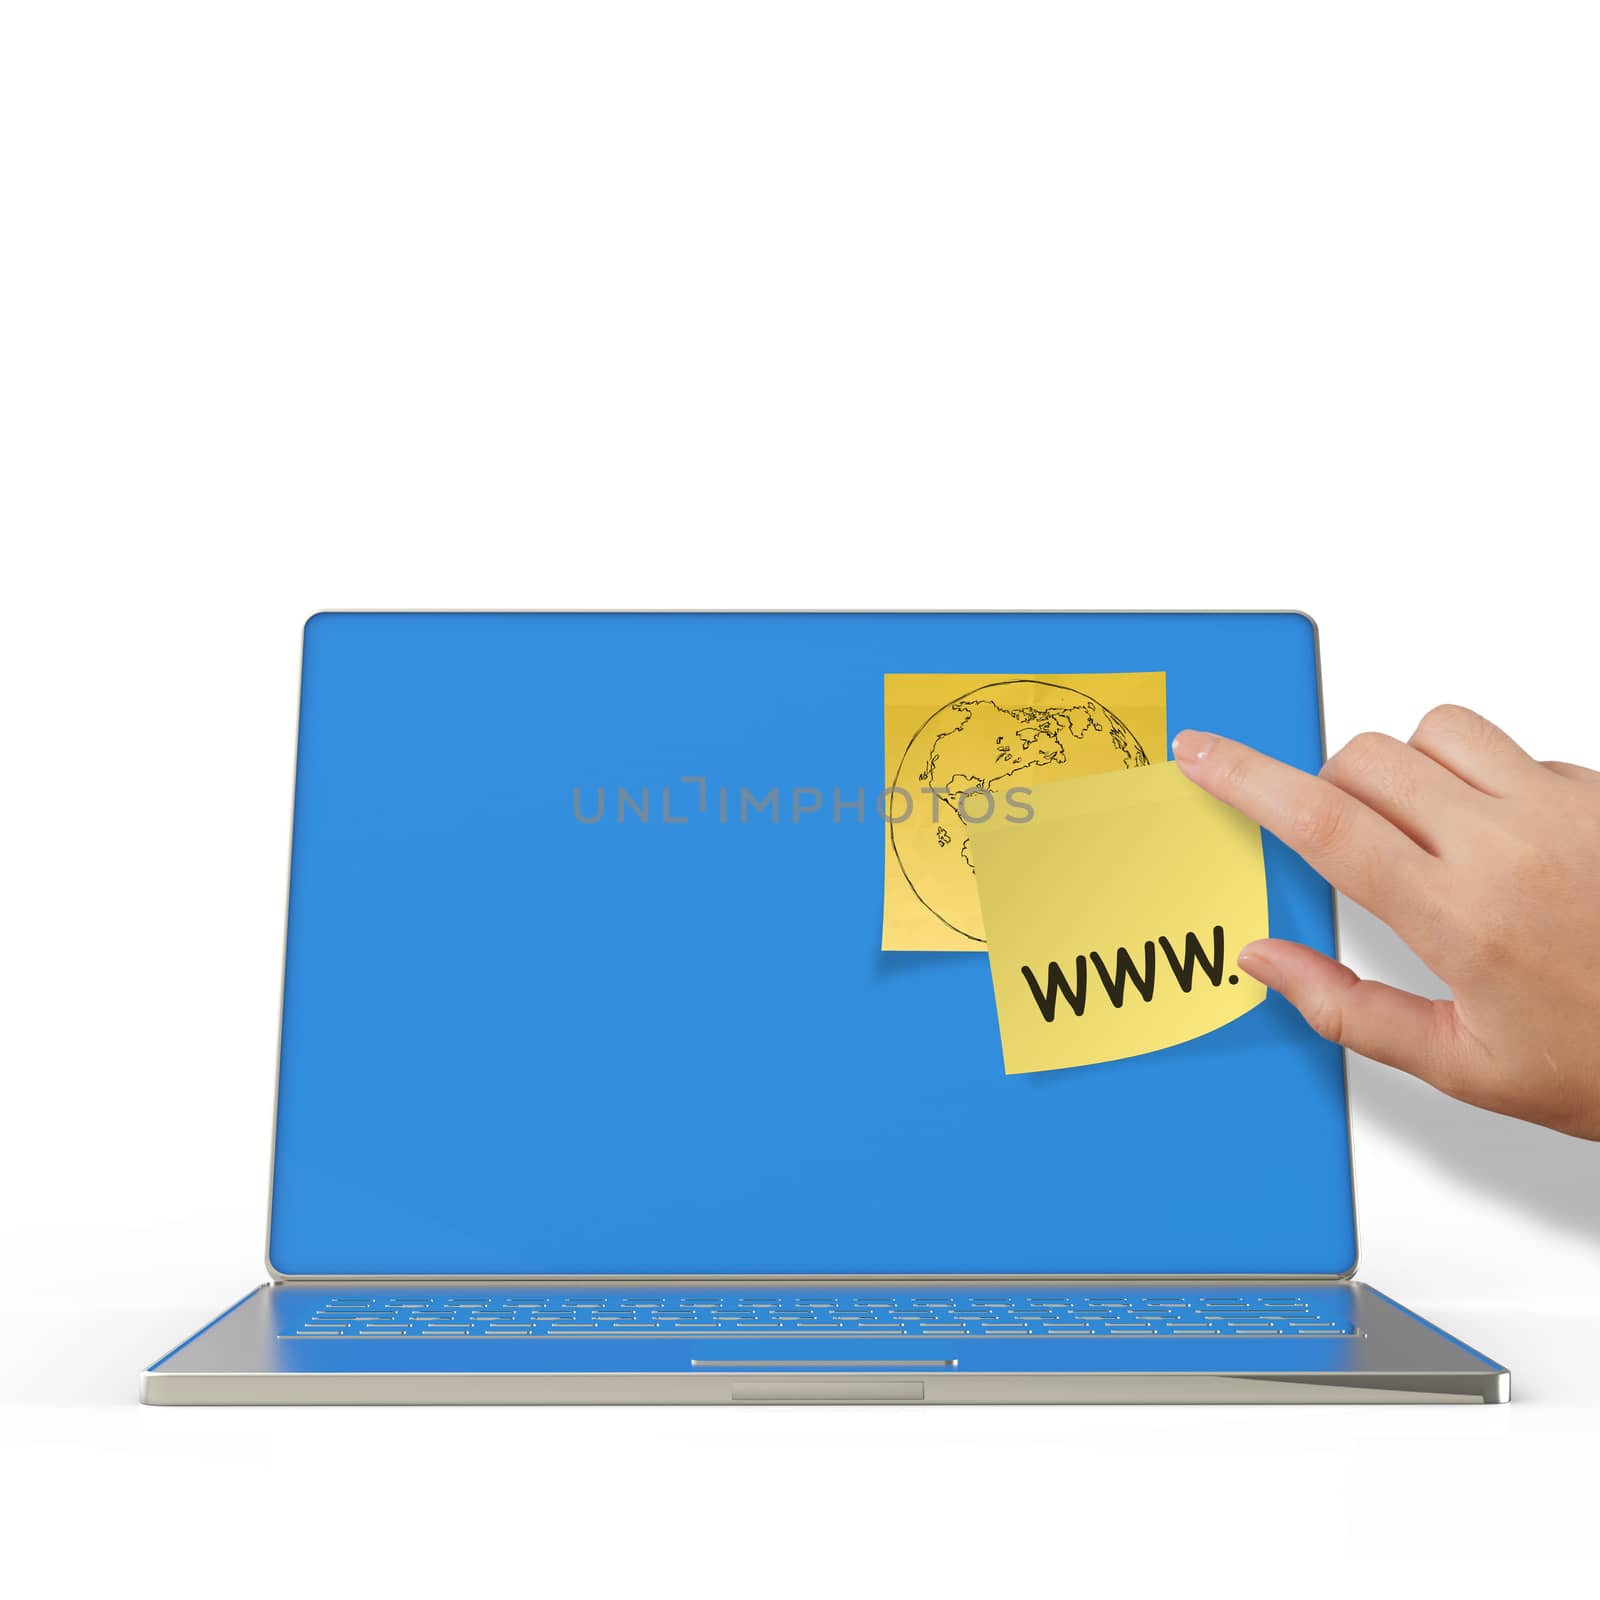 www. written on sticky note with computer laptop as concept